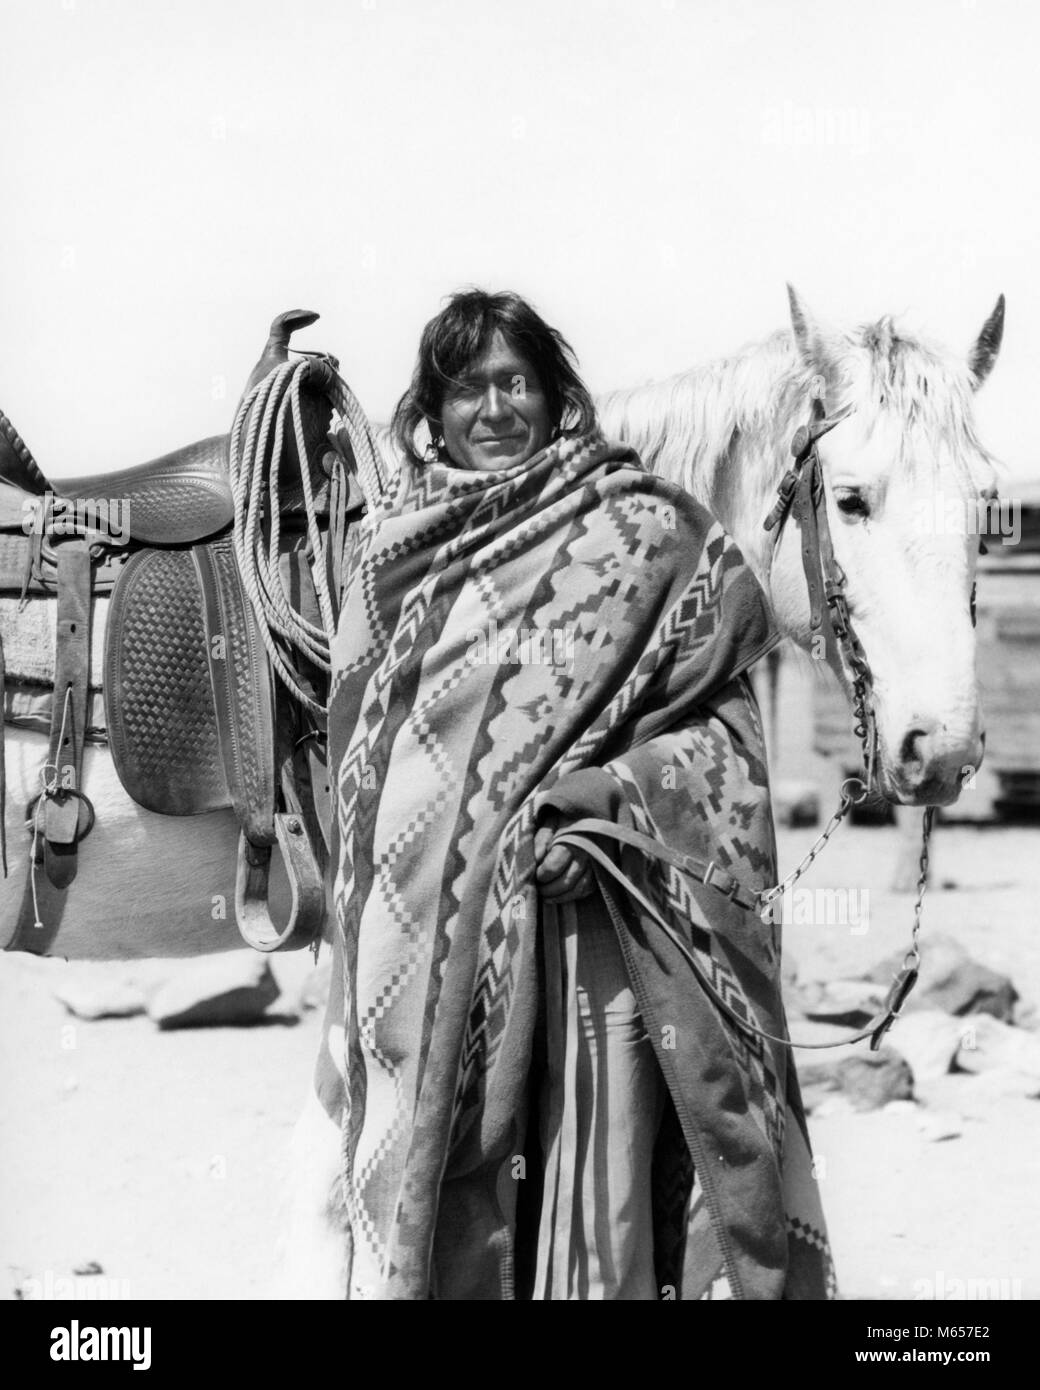 1930s NATIVE AMERICAN INDIAN MAN WEARING BLANKET STANDING BY HORSE LOOKING AT CAMERA COCHITI PUEBLO NEW MEXICO USA - i1279 HAR001 HARS 40-45 YEARS NORTH AMERICAN ONE ANIMAL MAMMALS PRIDE RESERVATION NATIVE AMERICAN PUEBLO COCHITI MALES MAMMAL MID-ADULT MID-ADULT MAN NATIVE AMERICANS NEW MEXICO B&W BLACK AND WHITE INDIGENOUS LOOKING AT CAMERA OLD FASHIONED PERSONS Stock Photo